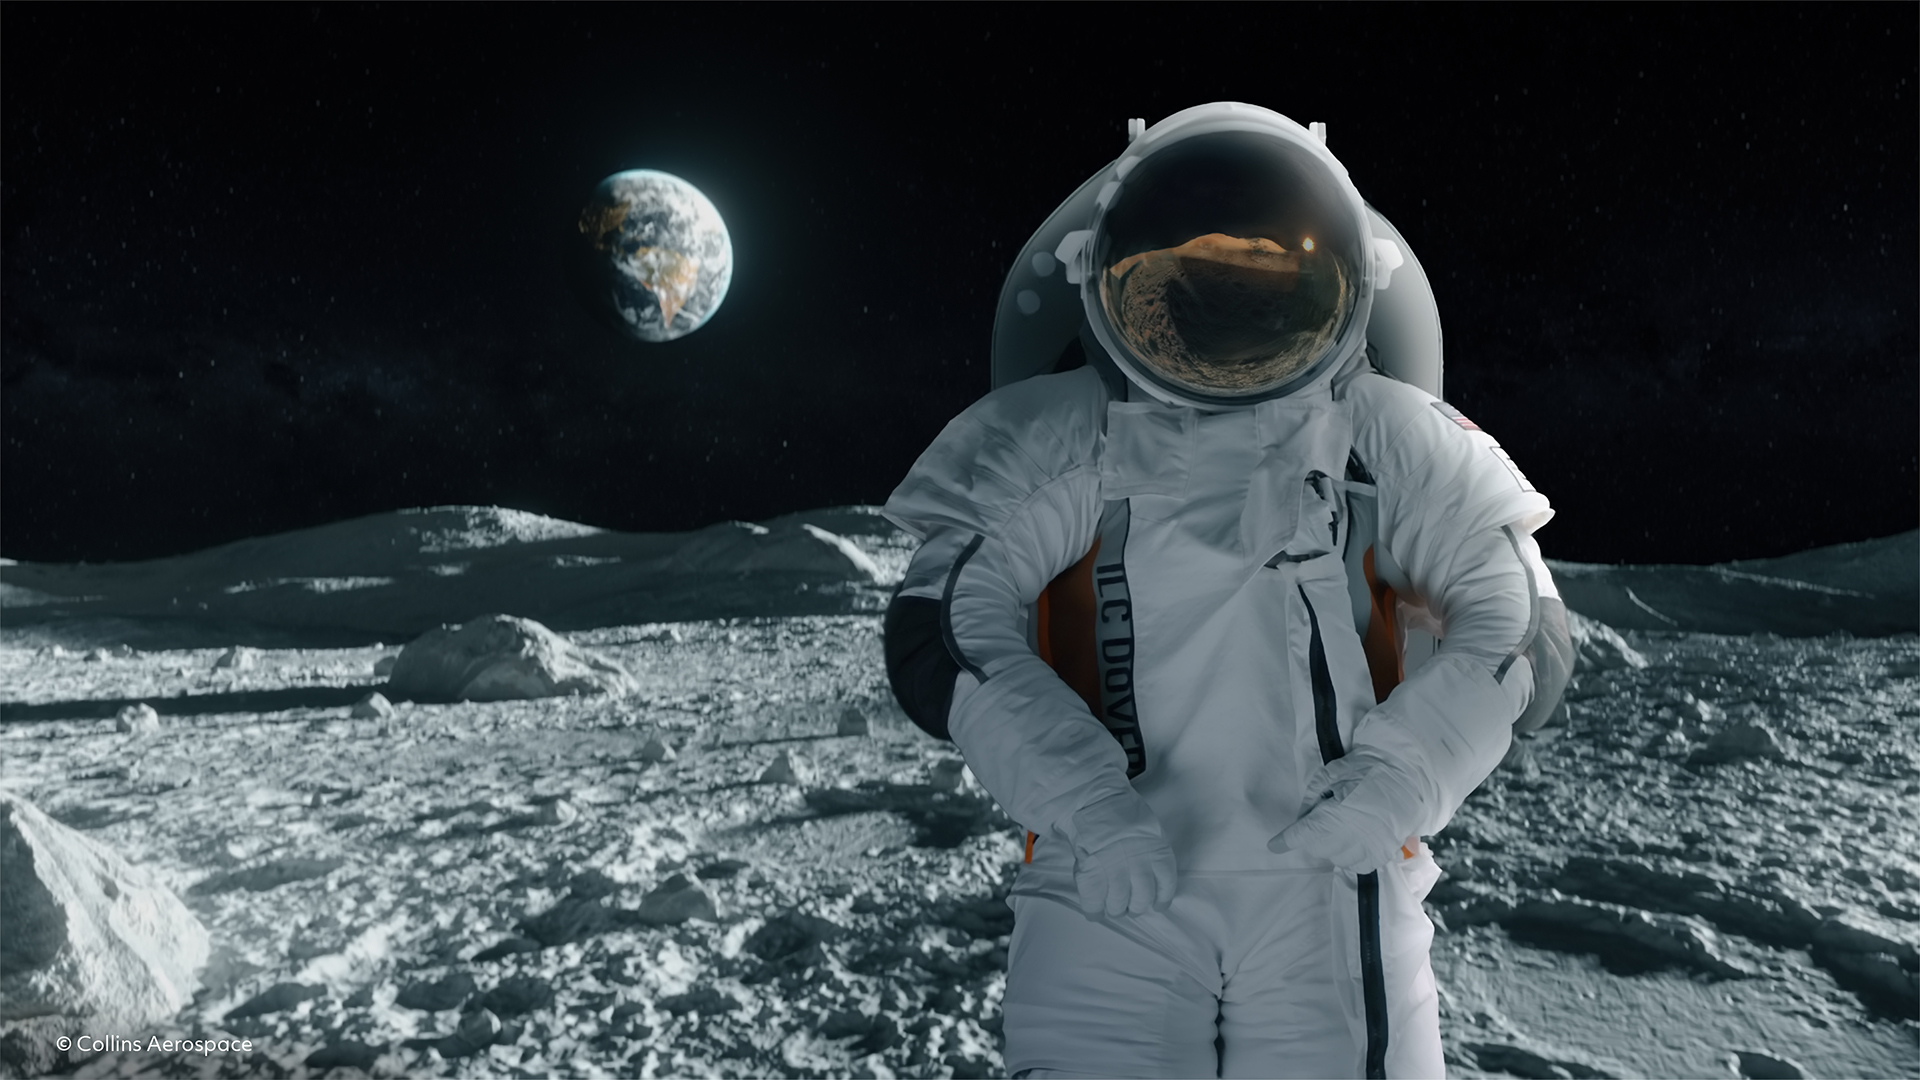 2 Houston Organizations Land Significant NASA Deal to Design Future-Gen Spacesuits